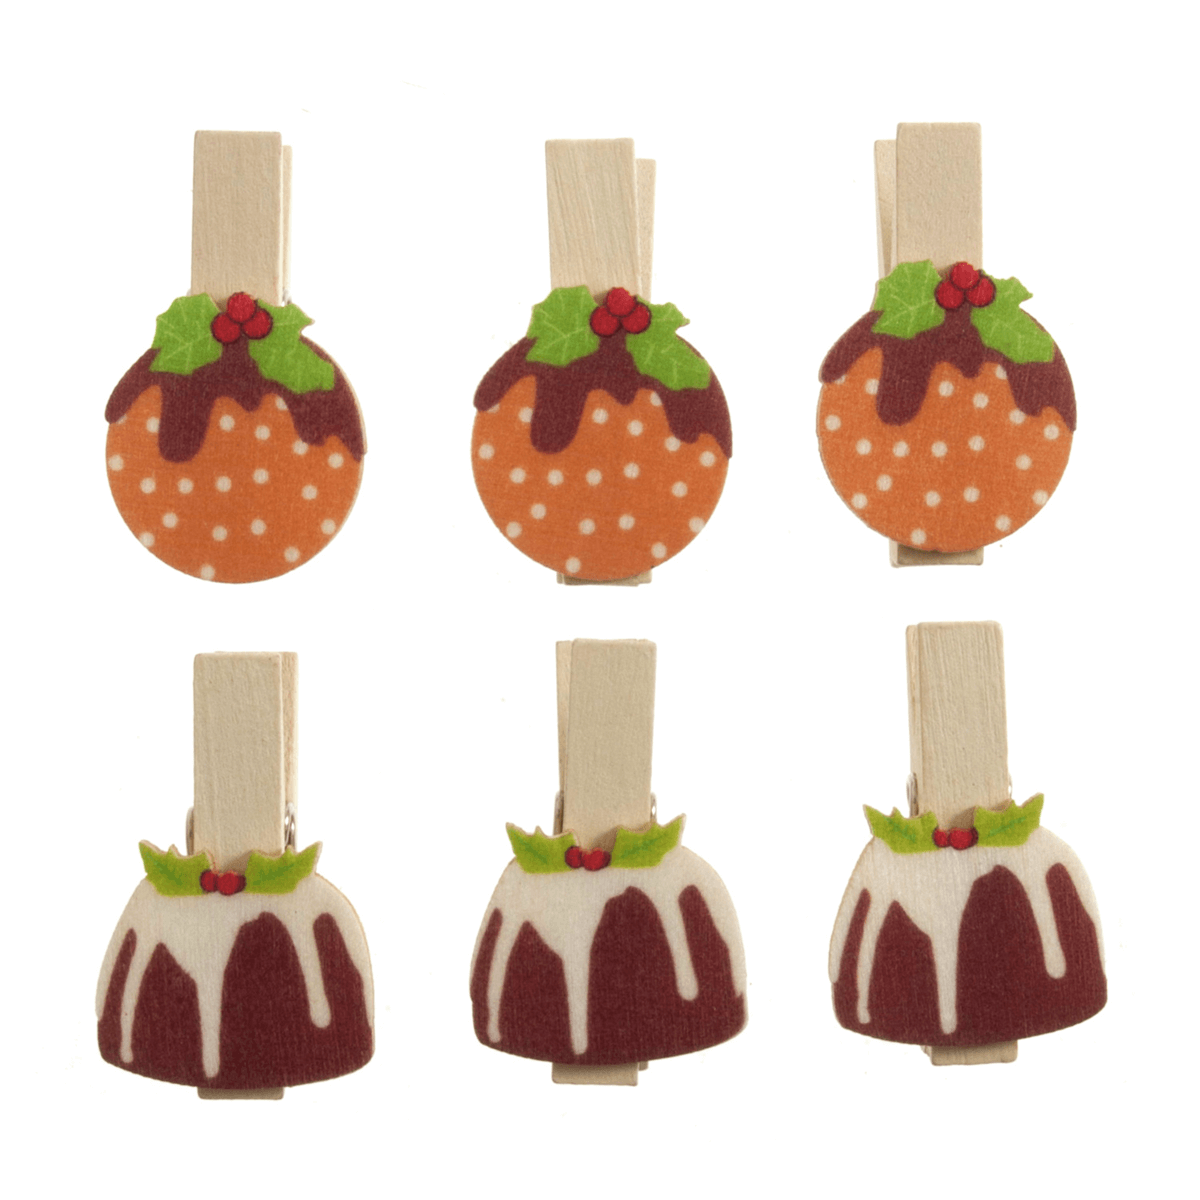 6 x Christmas Wooden Christmas Pudding Embellishments Scrap booking